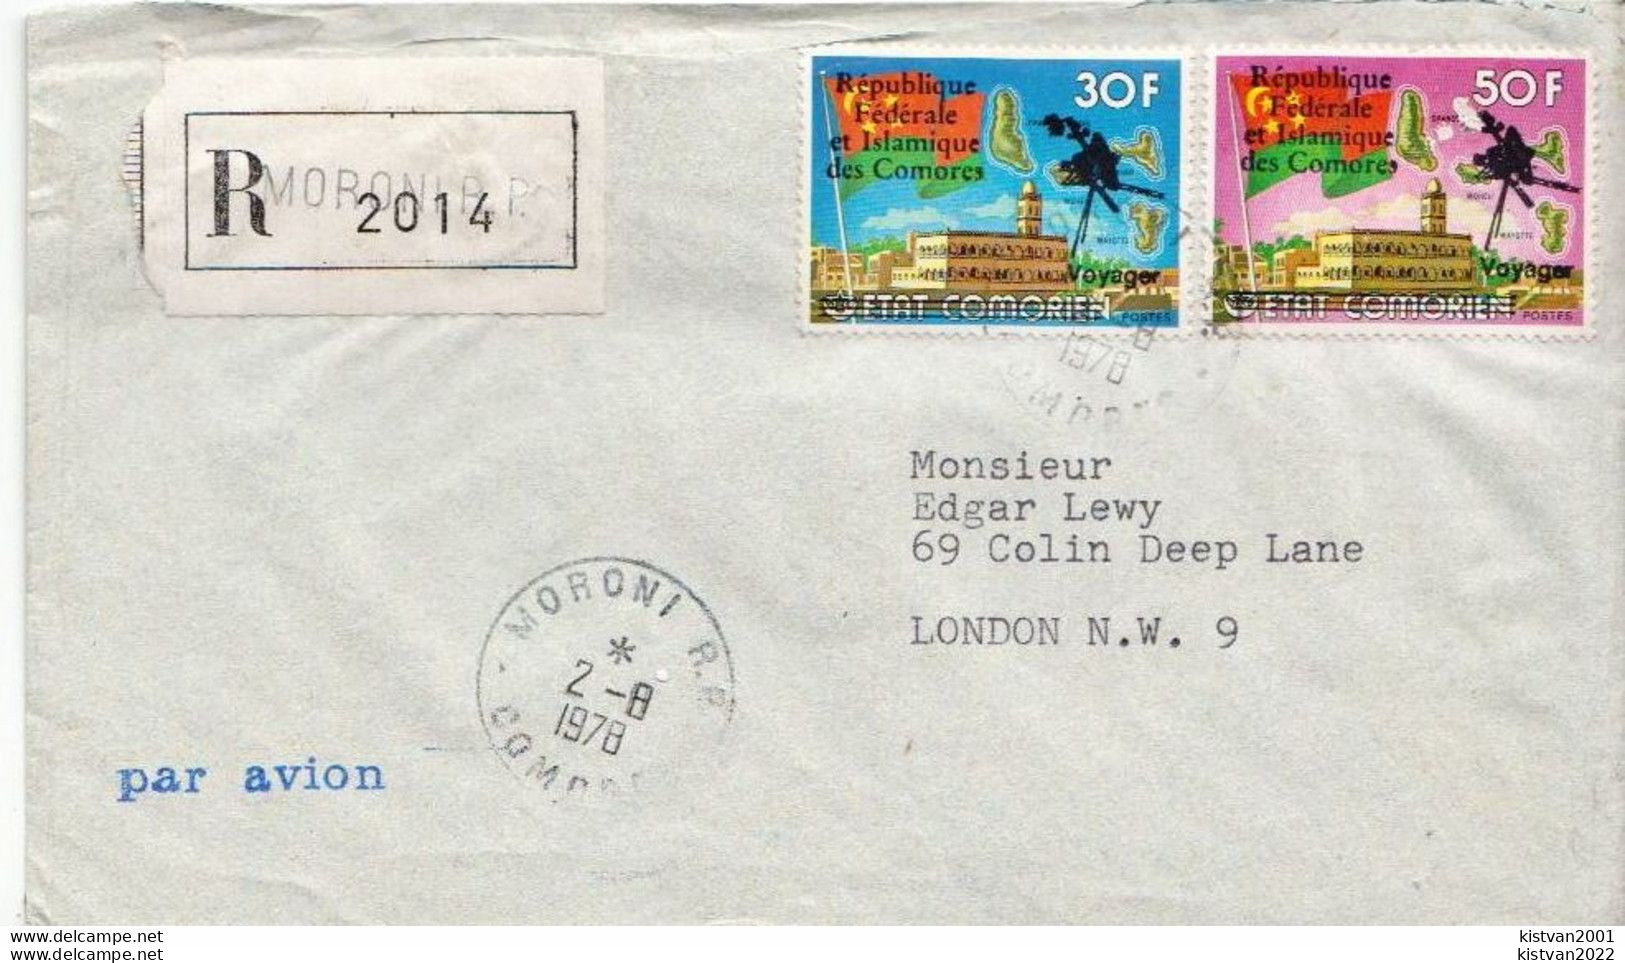 Comores Registered Cover With Overprinted Voyager Set From1978, Very Rare Postal History Cover!!!!! - Afrika